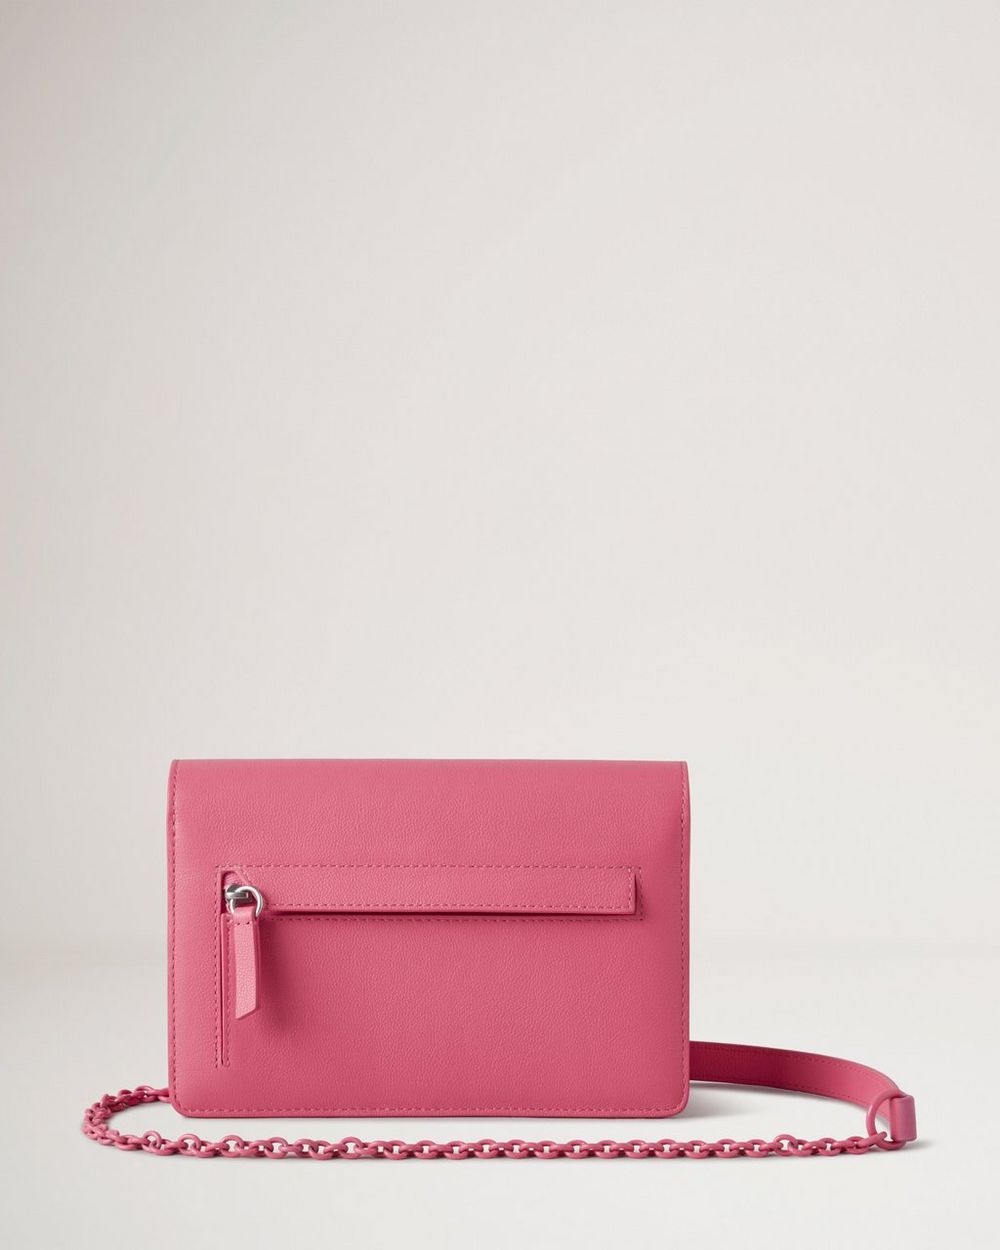 Bayswater Tote, Mulberry Pink Small Classic Grain, Women